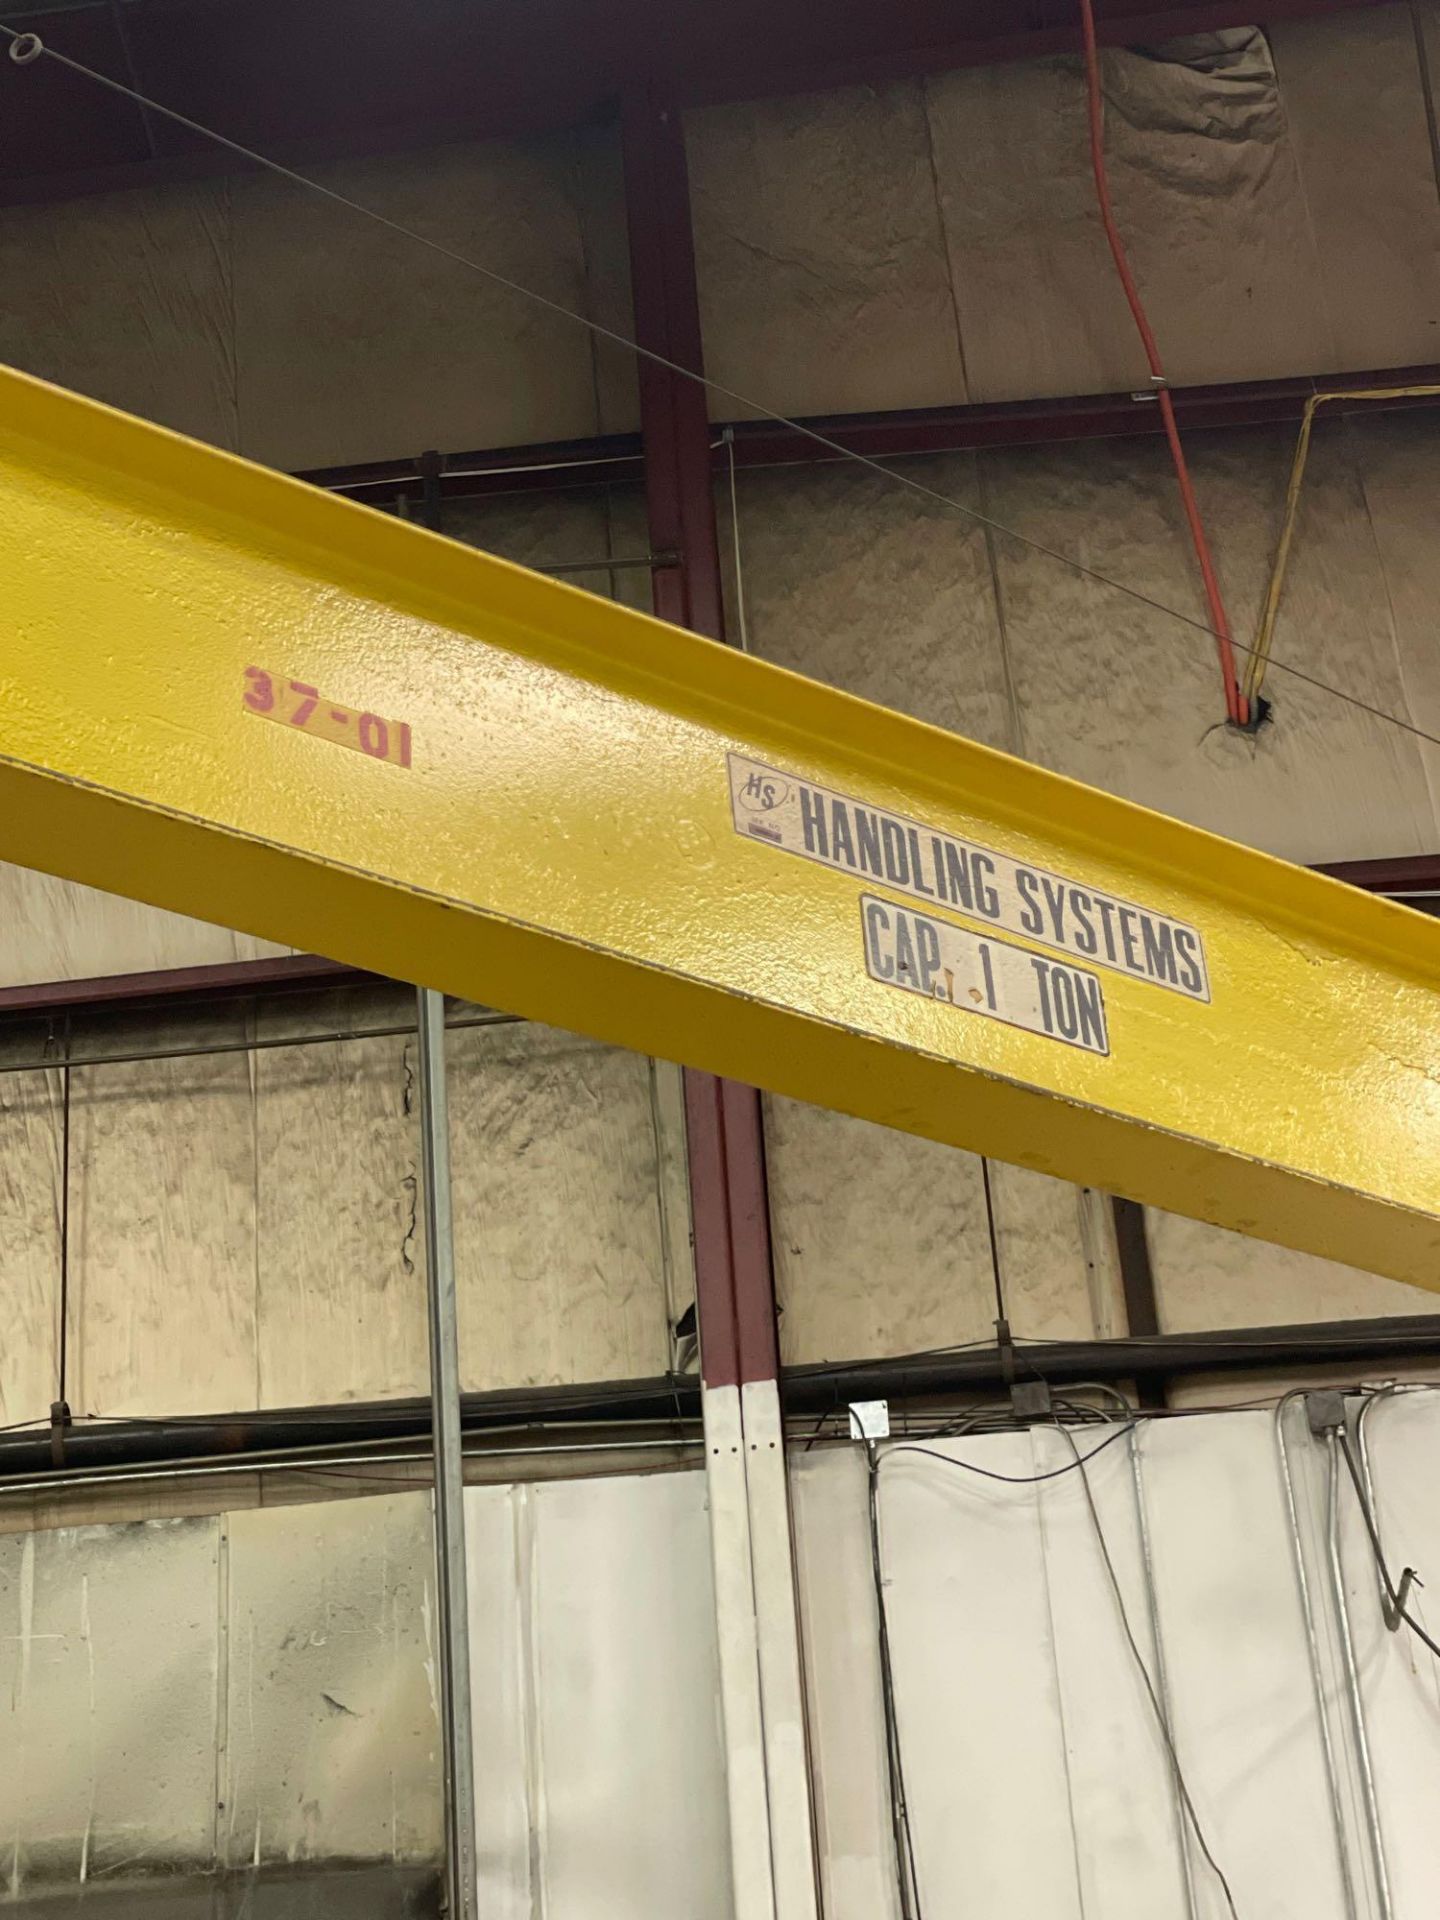 1 Ton “Handling Systems” Jib Crane with hoist w/ 17 ft Arm - Image 4 of 5